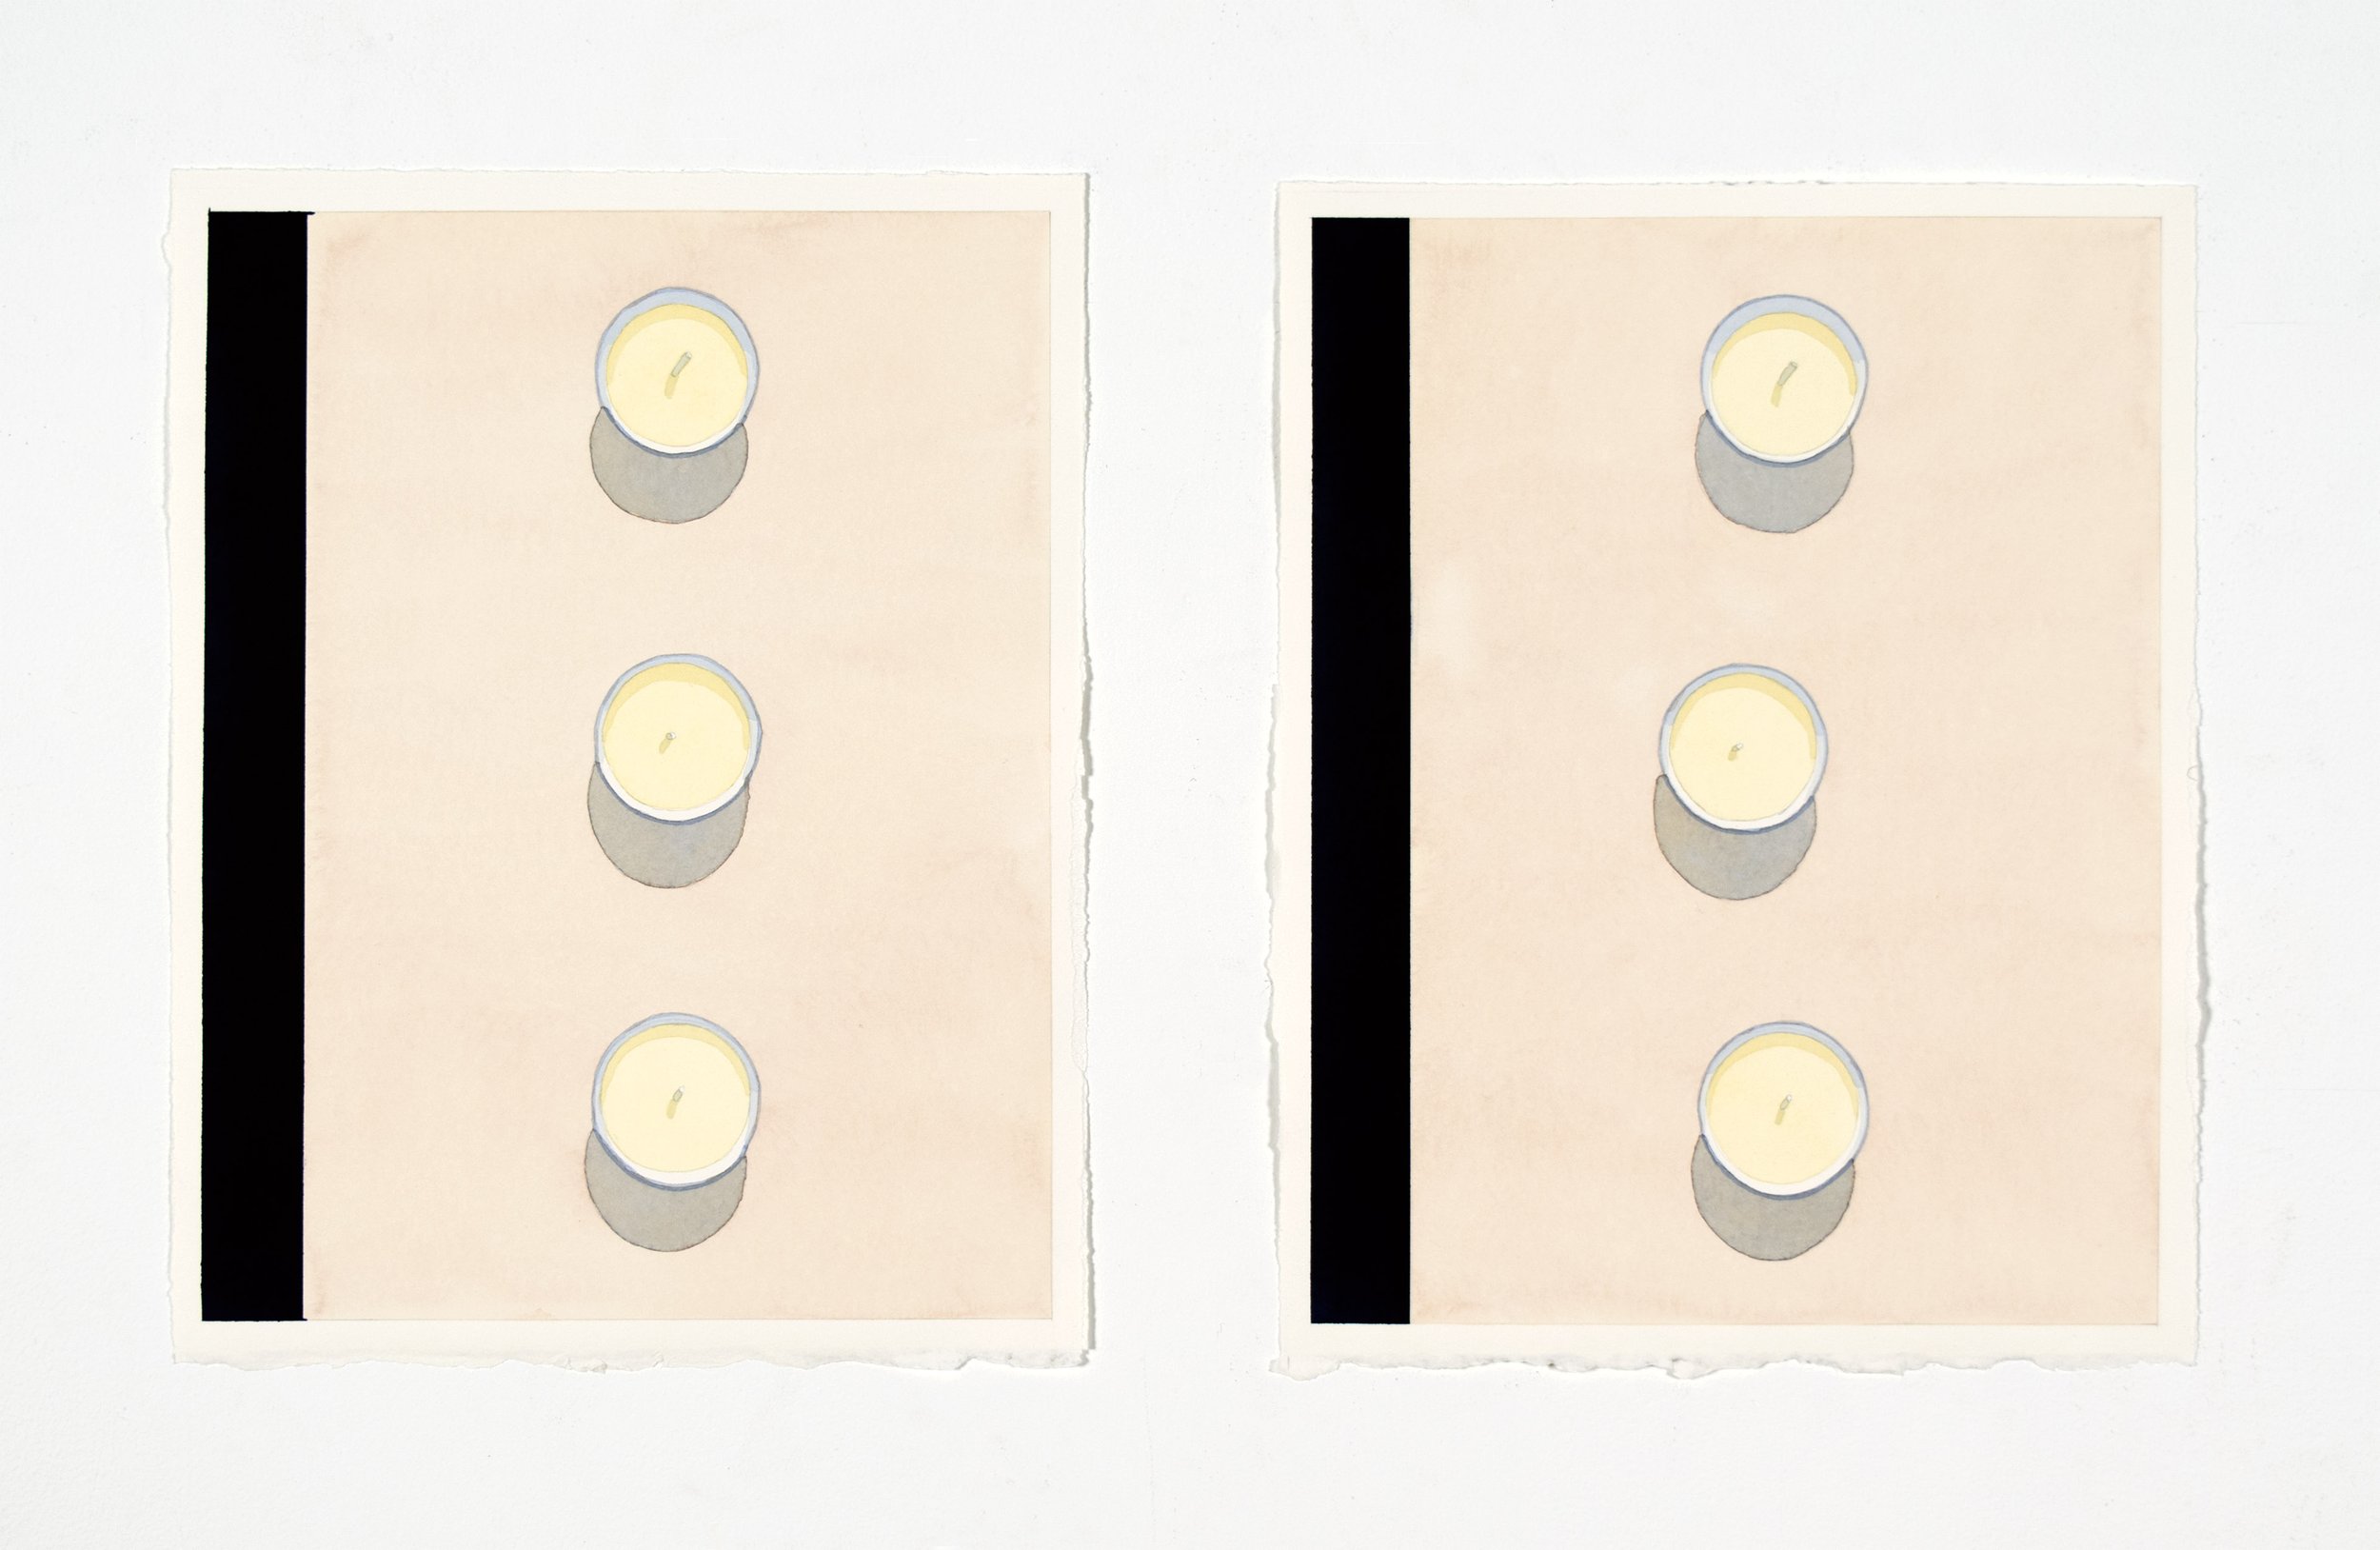   Adjustment No. 1   Diptych, 13” x  10” each Watercolor on paper 2016 